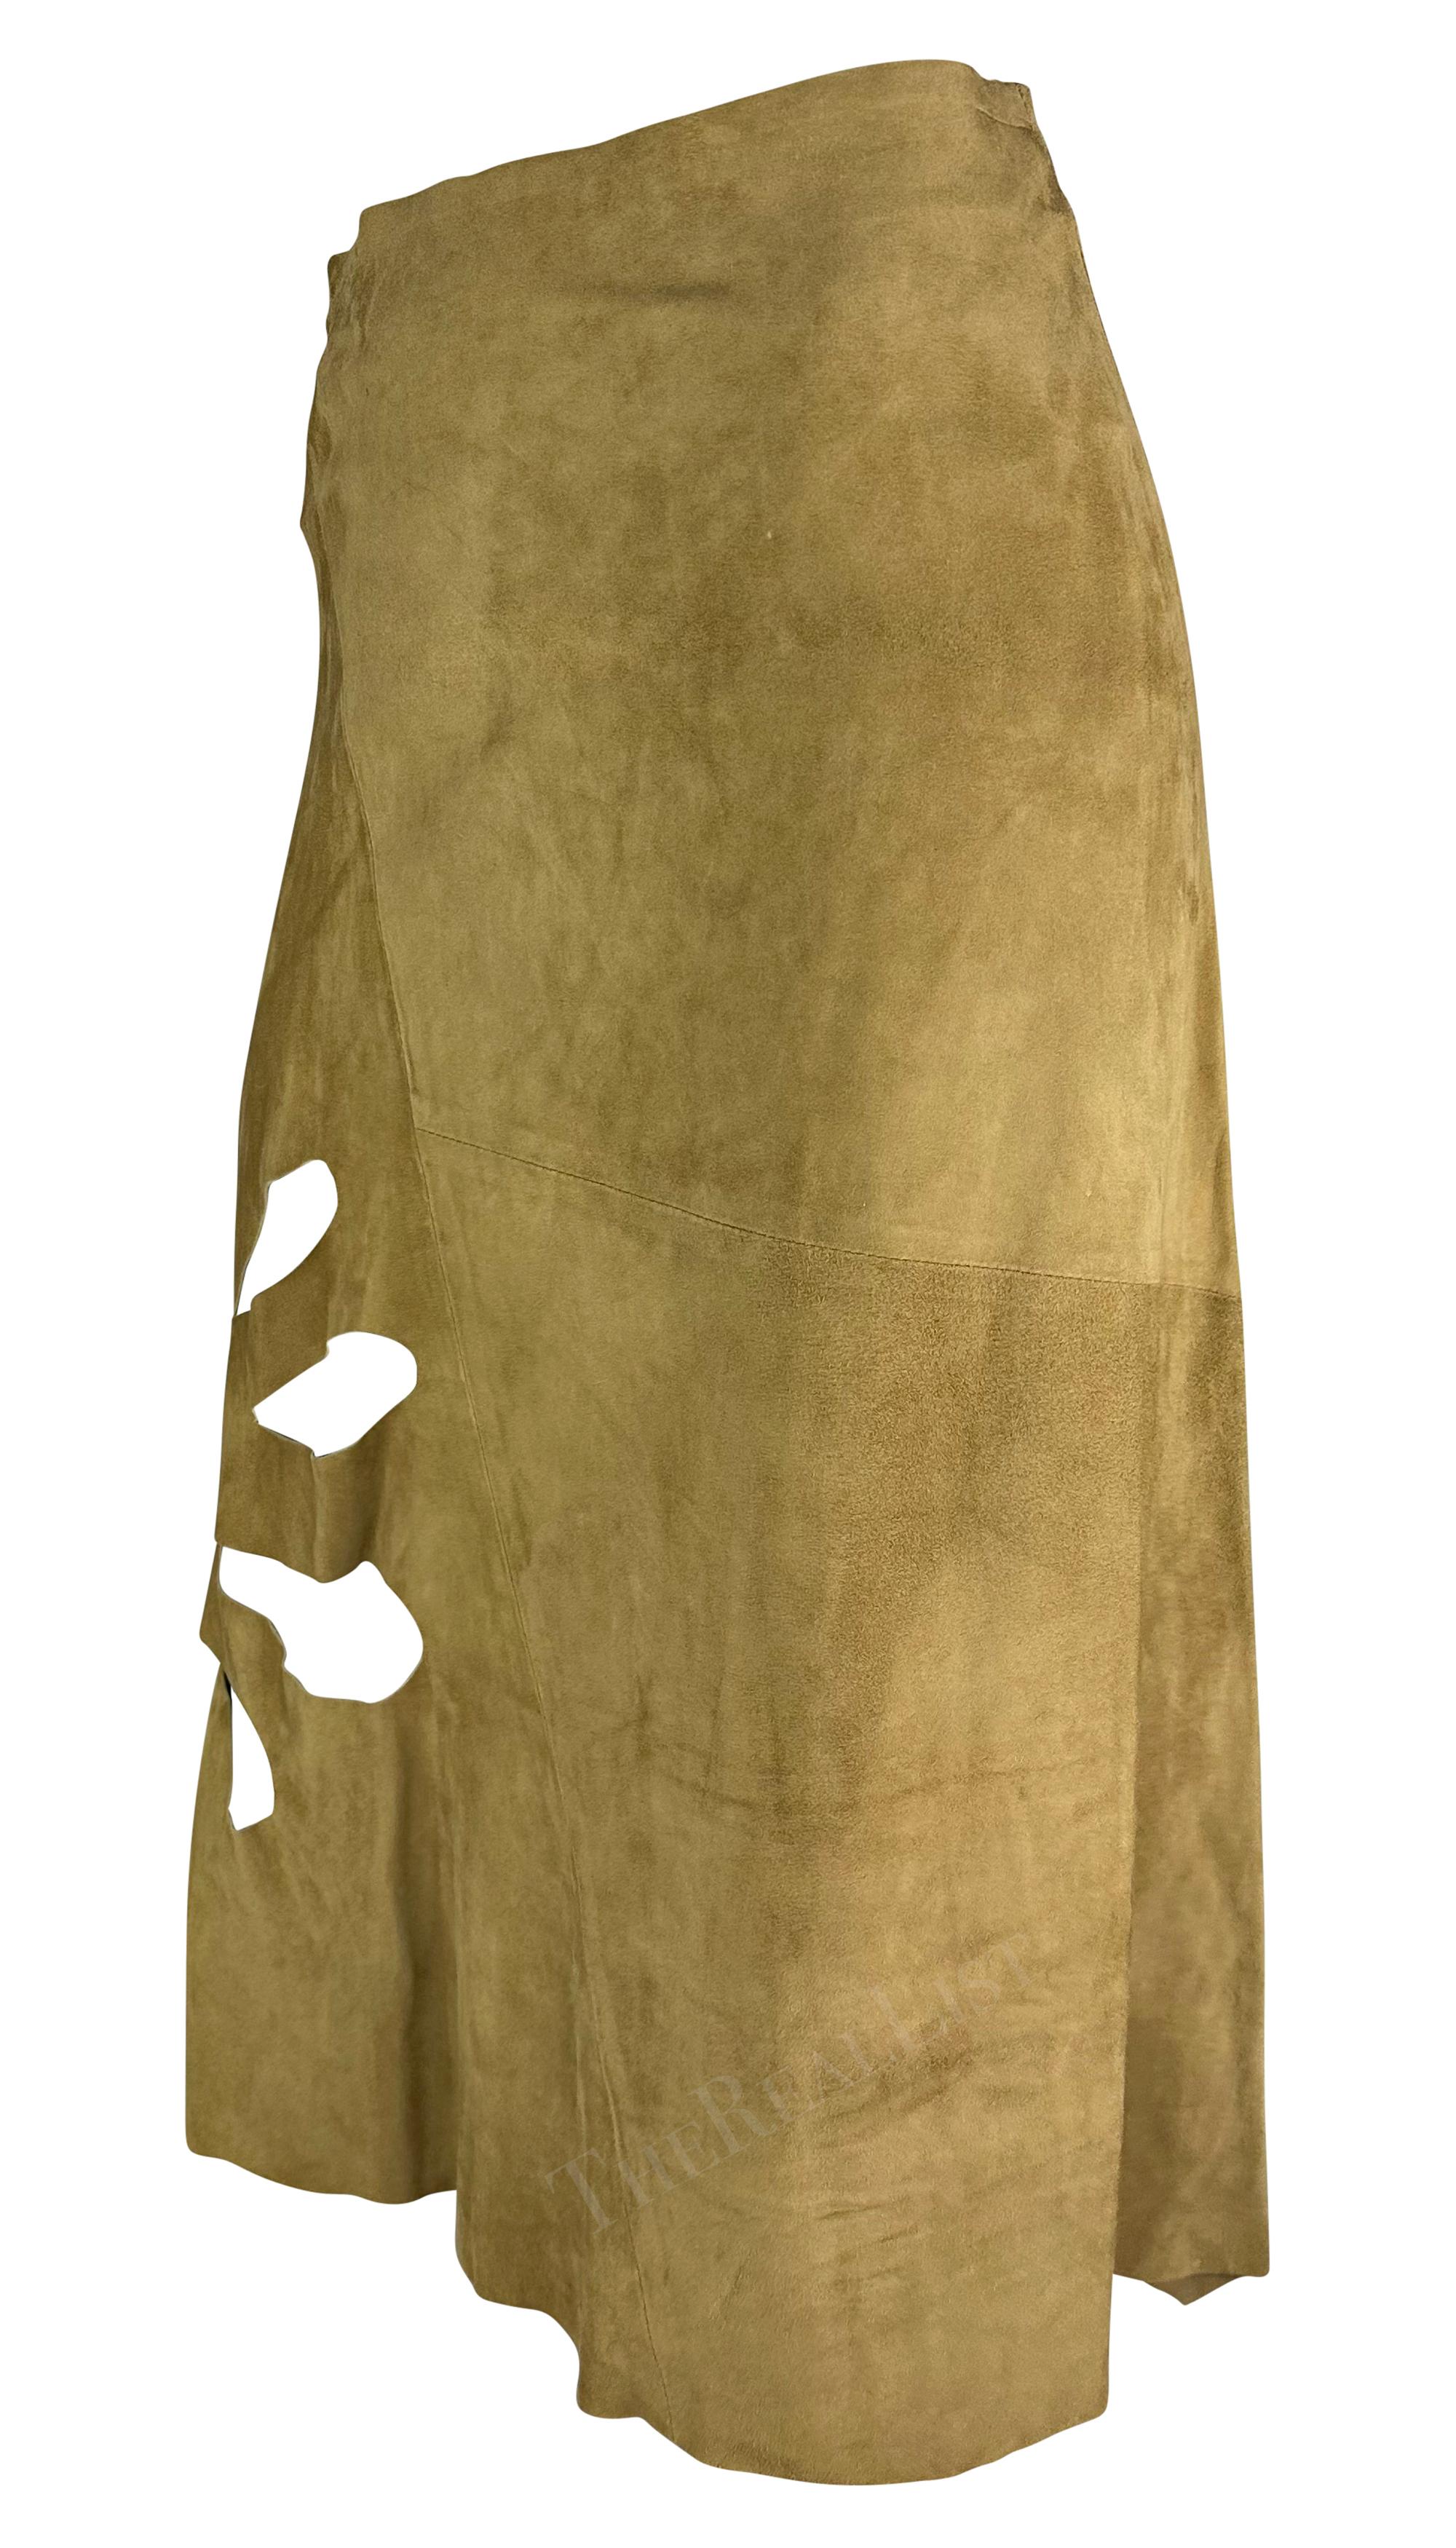 S/S 2002 Gucci by Tom Ford Tan Suede Floral Cutout Flare Wrap Skirt For Sale 3